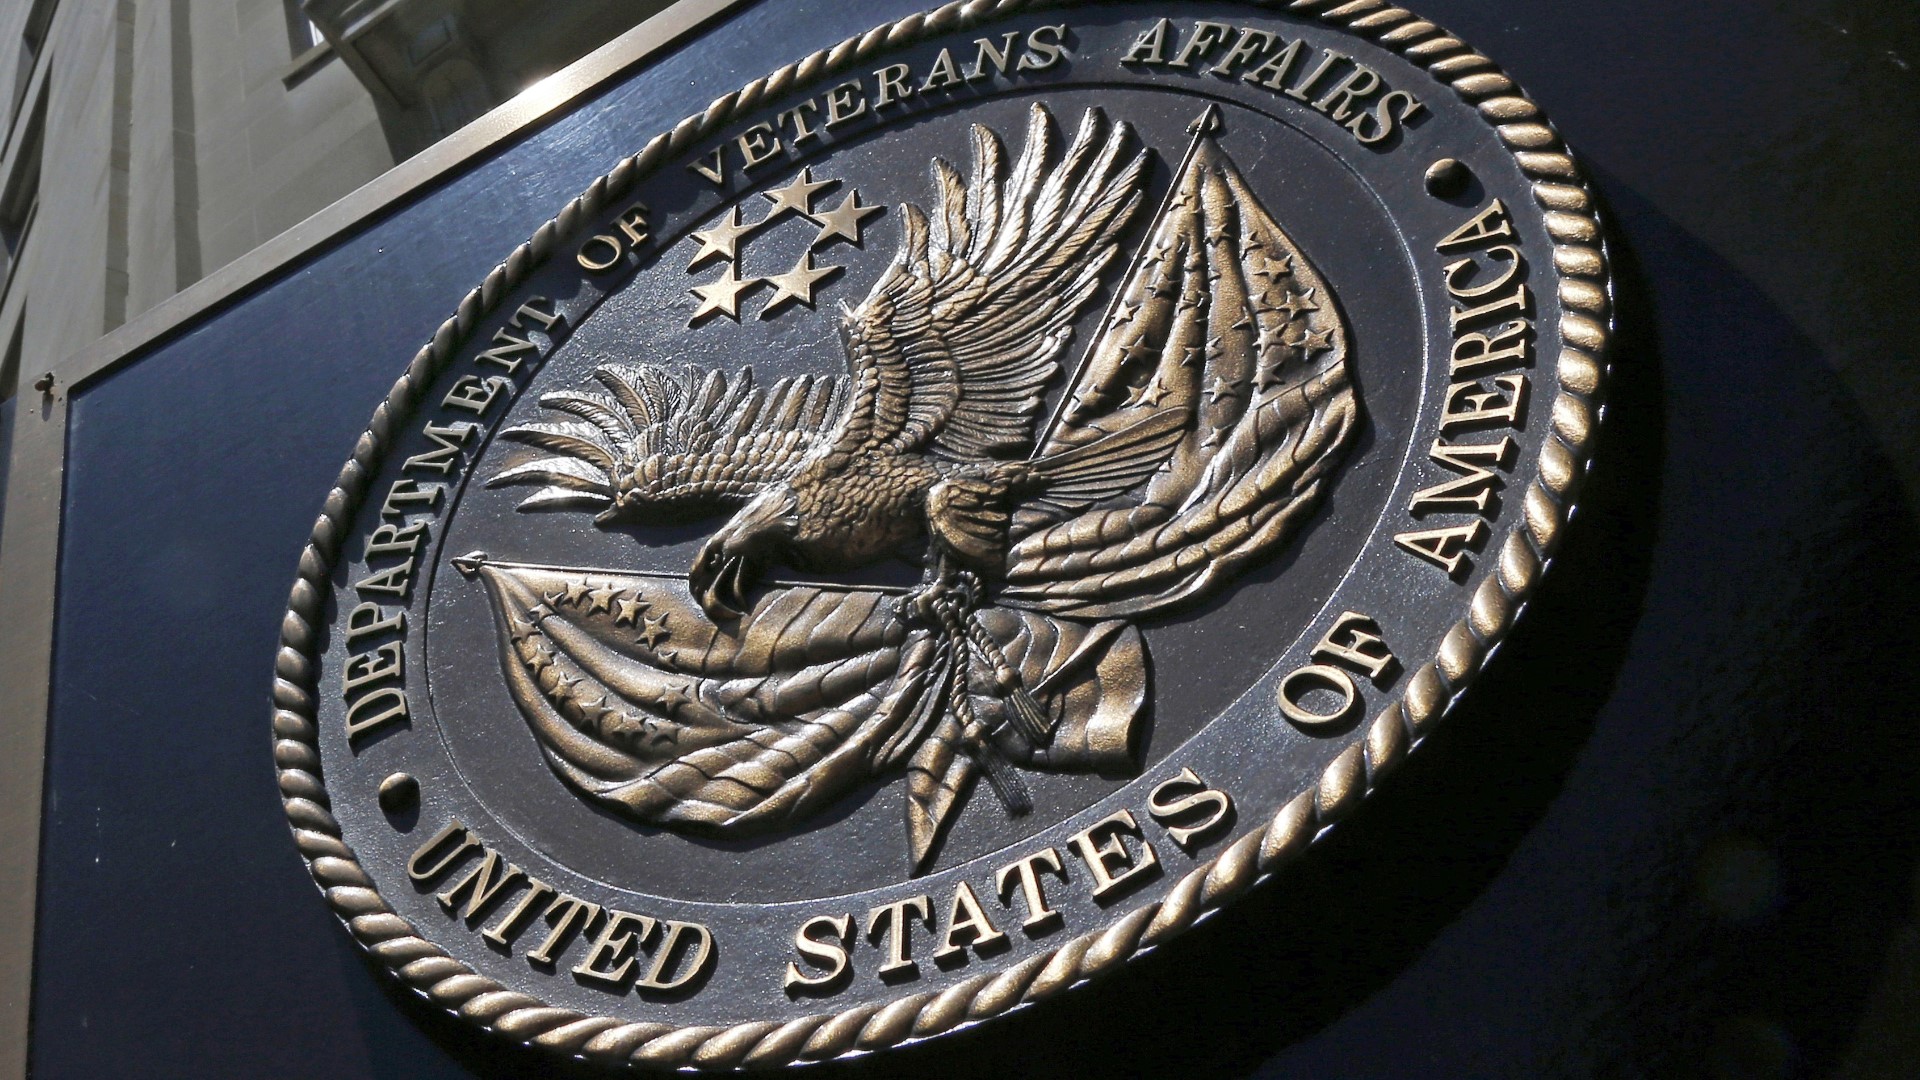 The Department of Veterans Affairs said the historic enrollment is because of the PACT Act, which allowed the VA to expand its benefits nationwide.